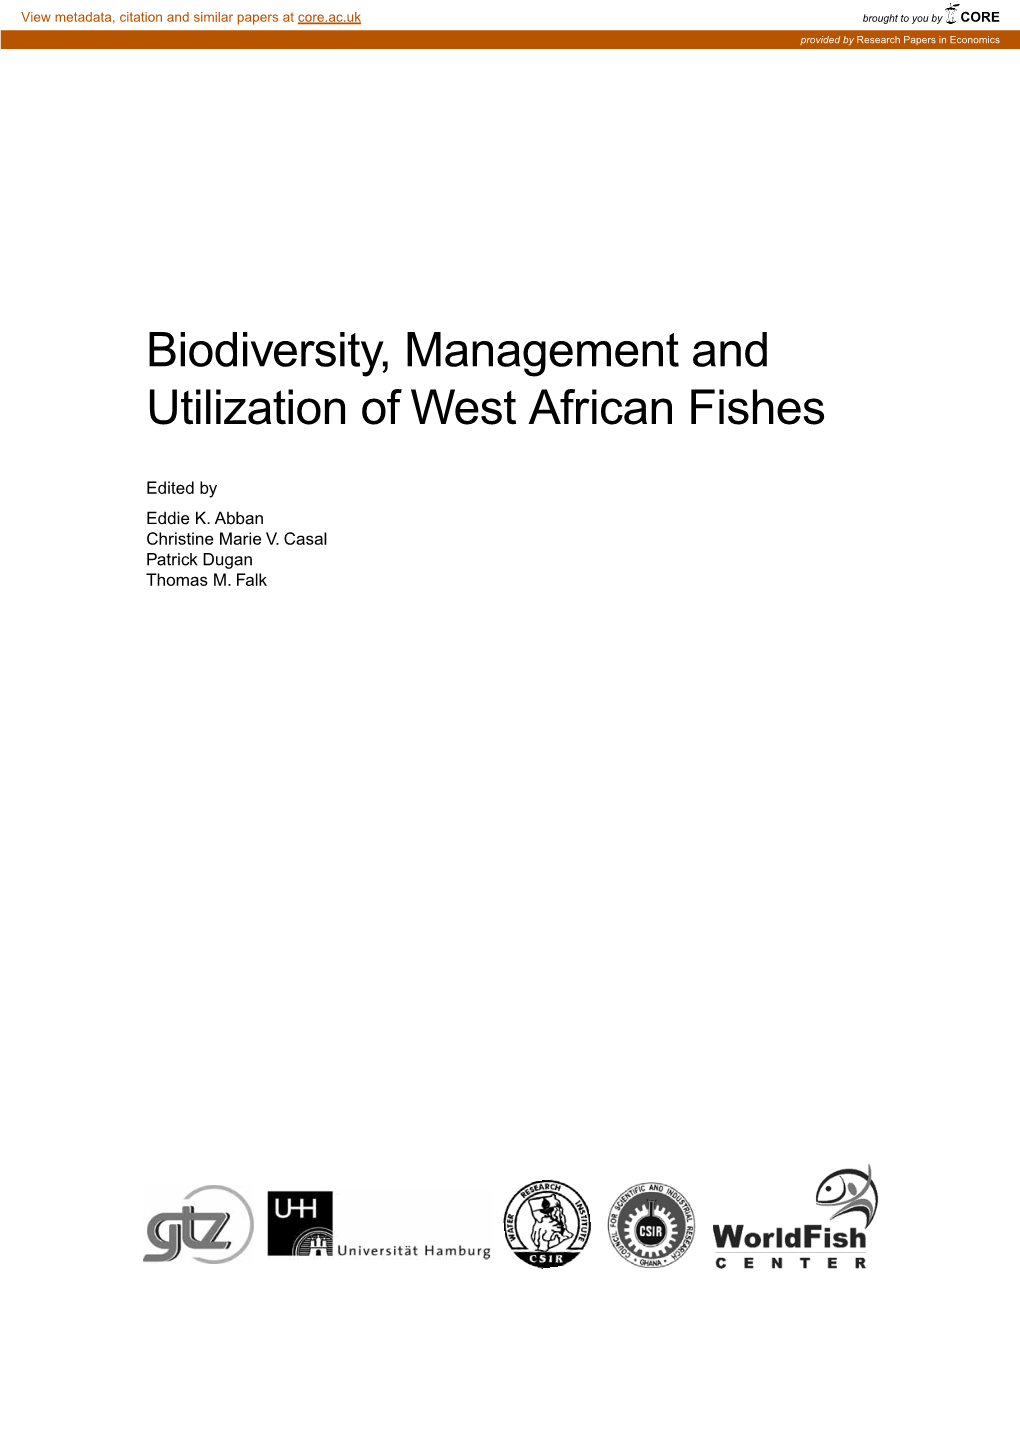 Biodiversity, Management and Utilization of West African Fishes